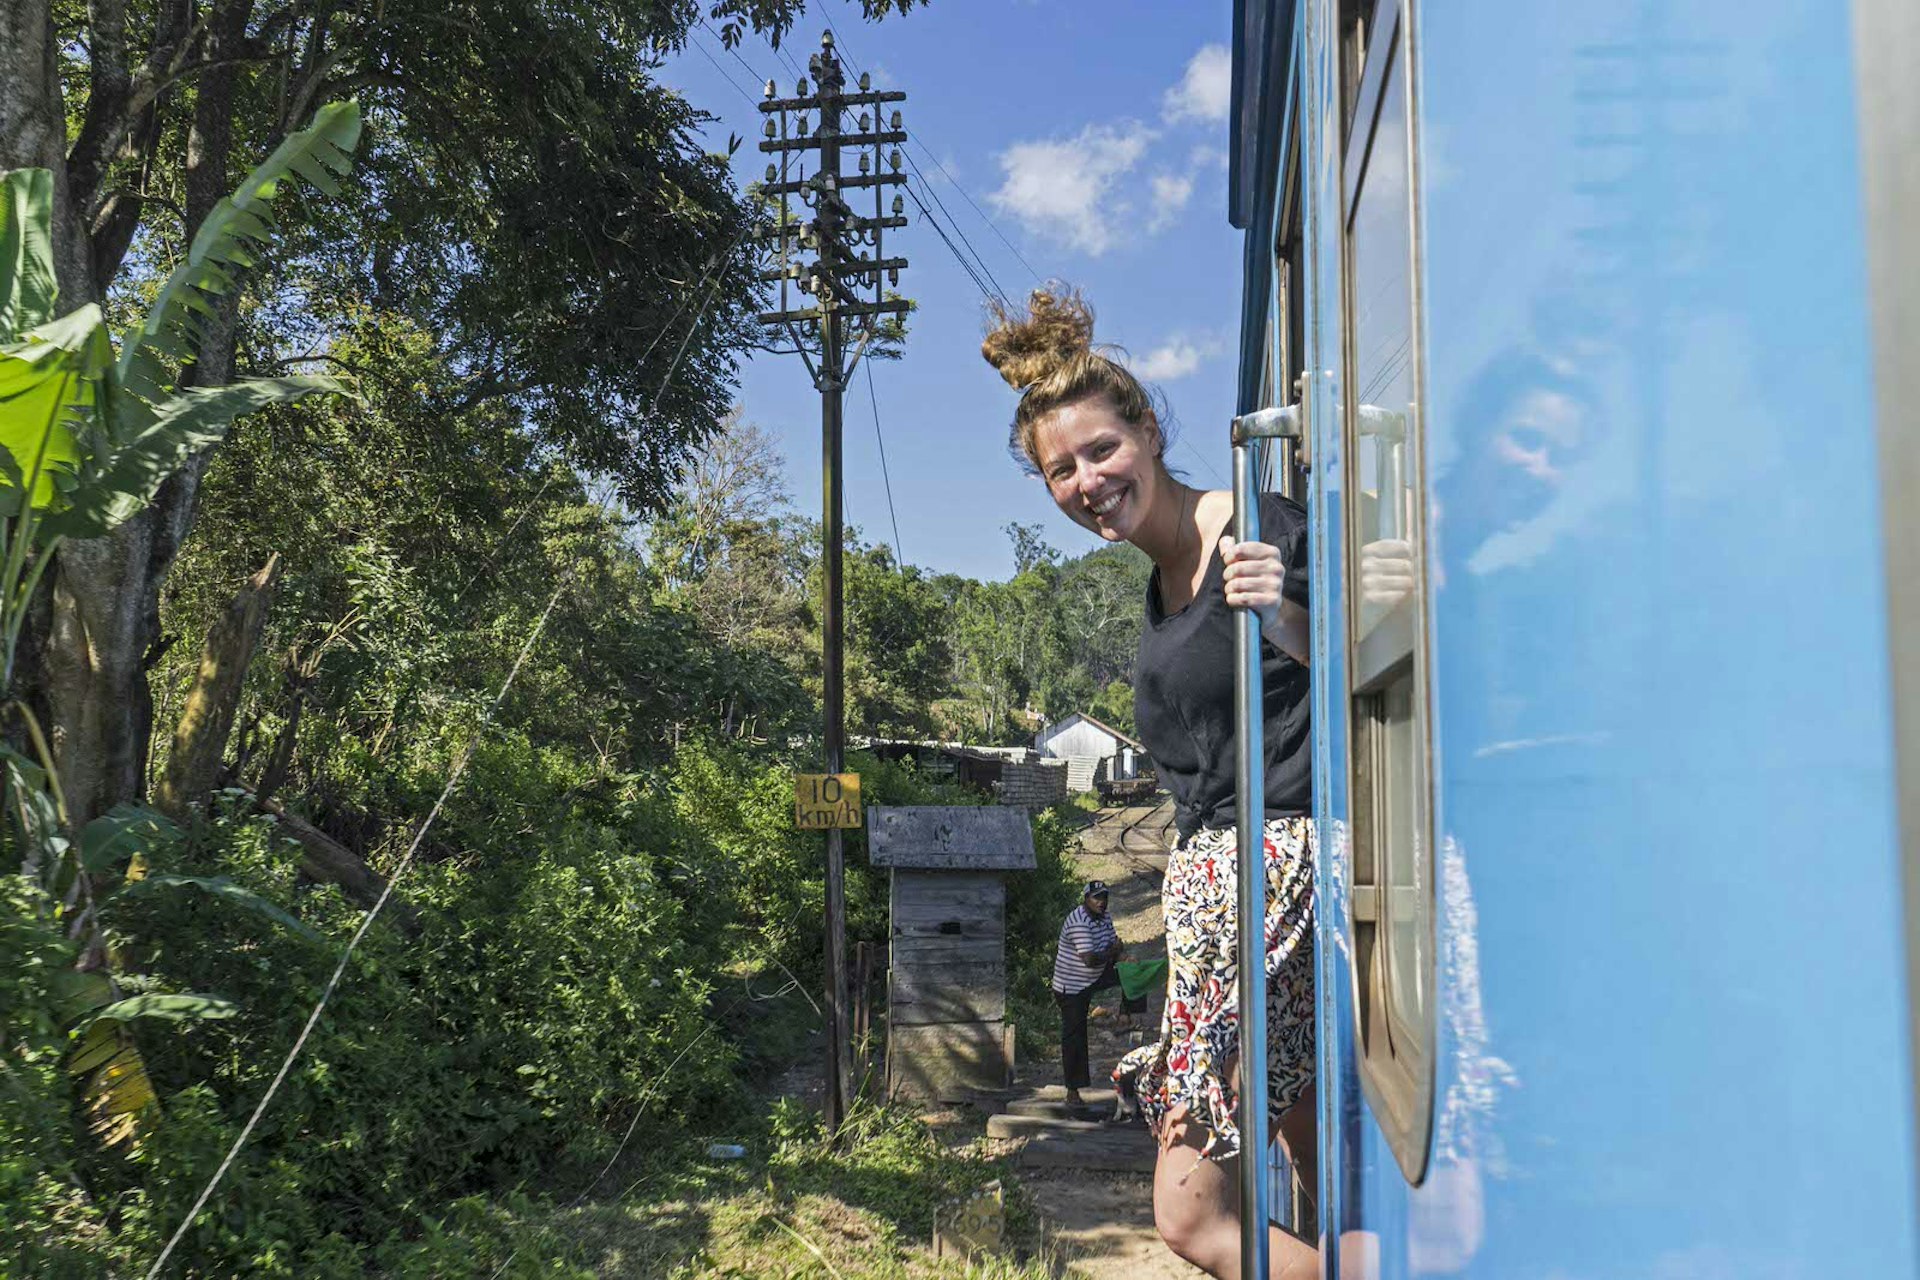 A woman hangs out of a train door smiling at the camera, positioned out of a train window. The train is bright blue and it is a sunny day in Ella, Sri Lanka. There are tropical trees next to the tracks. 